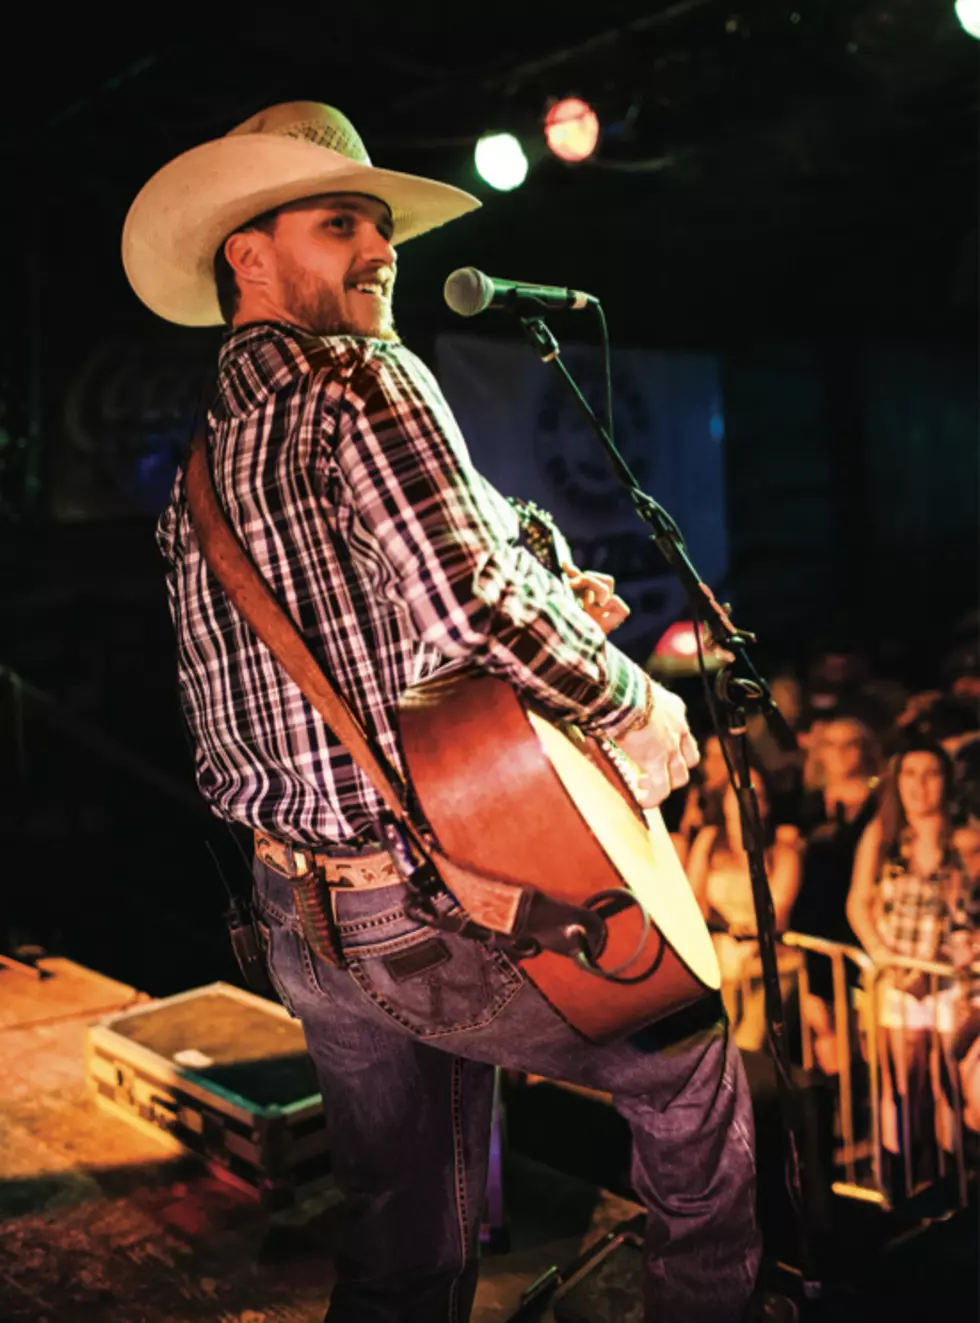 Free VIP Passes For Cody Johnson, Kevin Fowler And Koe Wetzel Friday Night